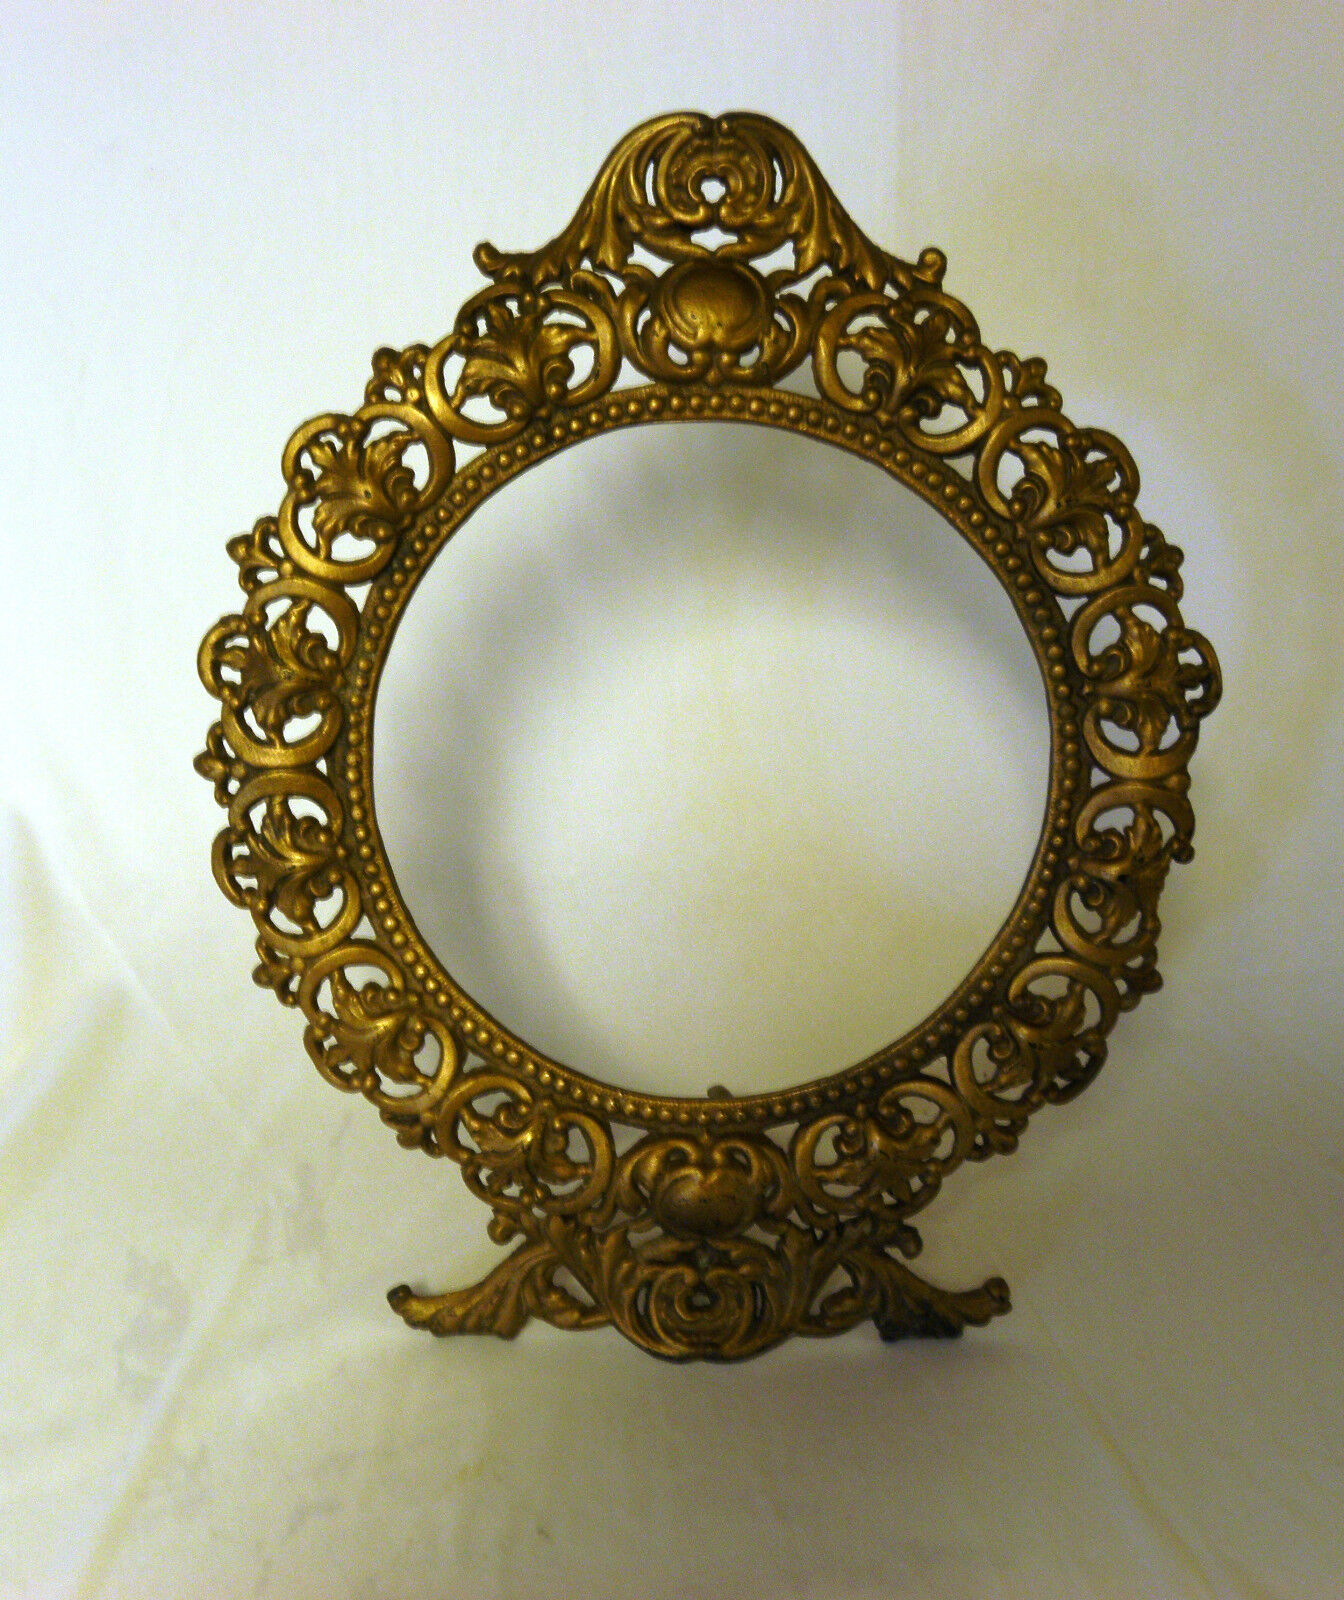 Fabulous Ornate Vintage Gold Gilded Metal Picture Or Mirror Frame 0081010